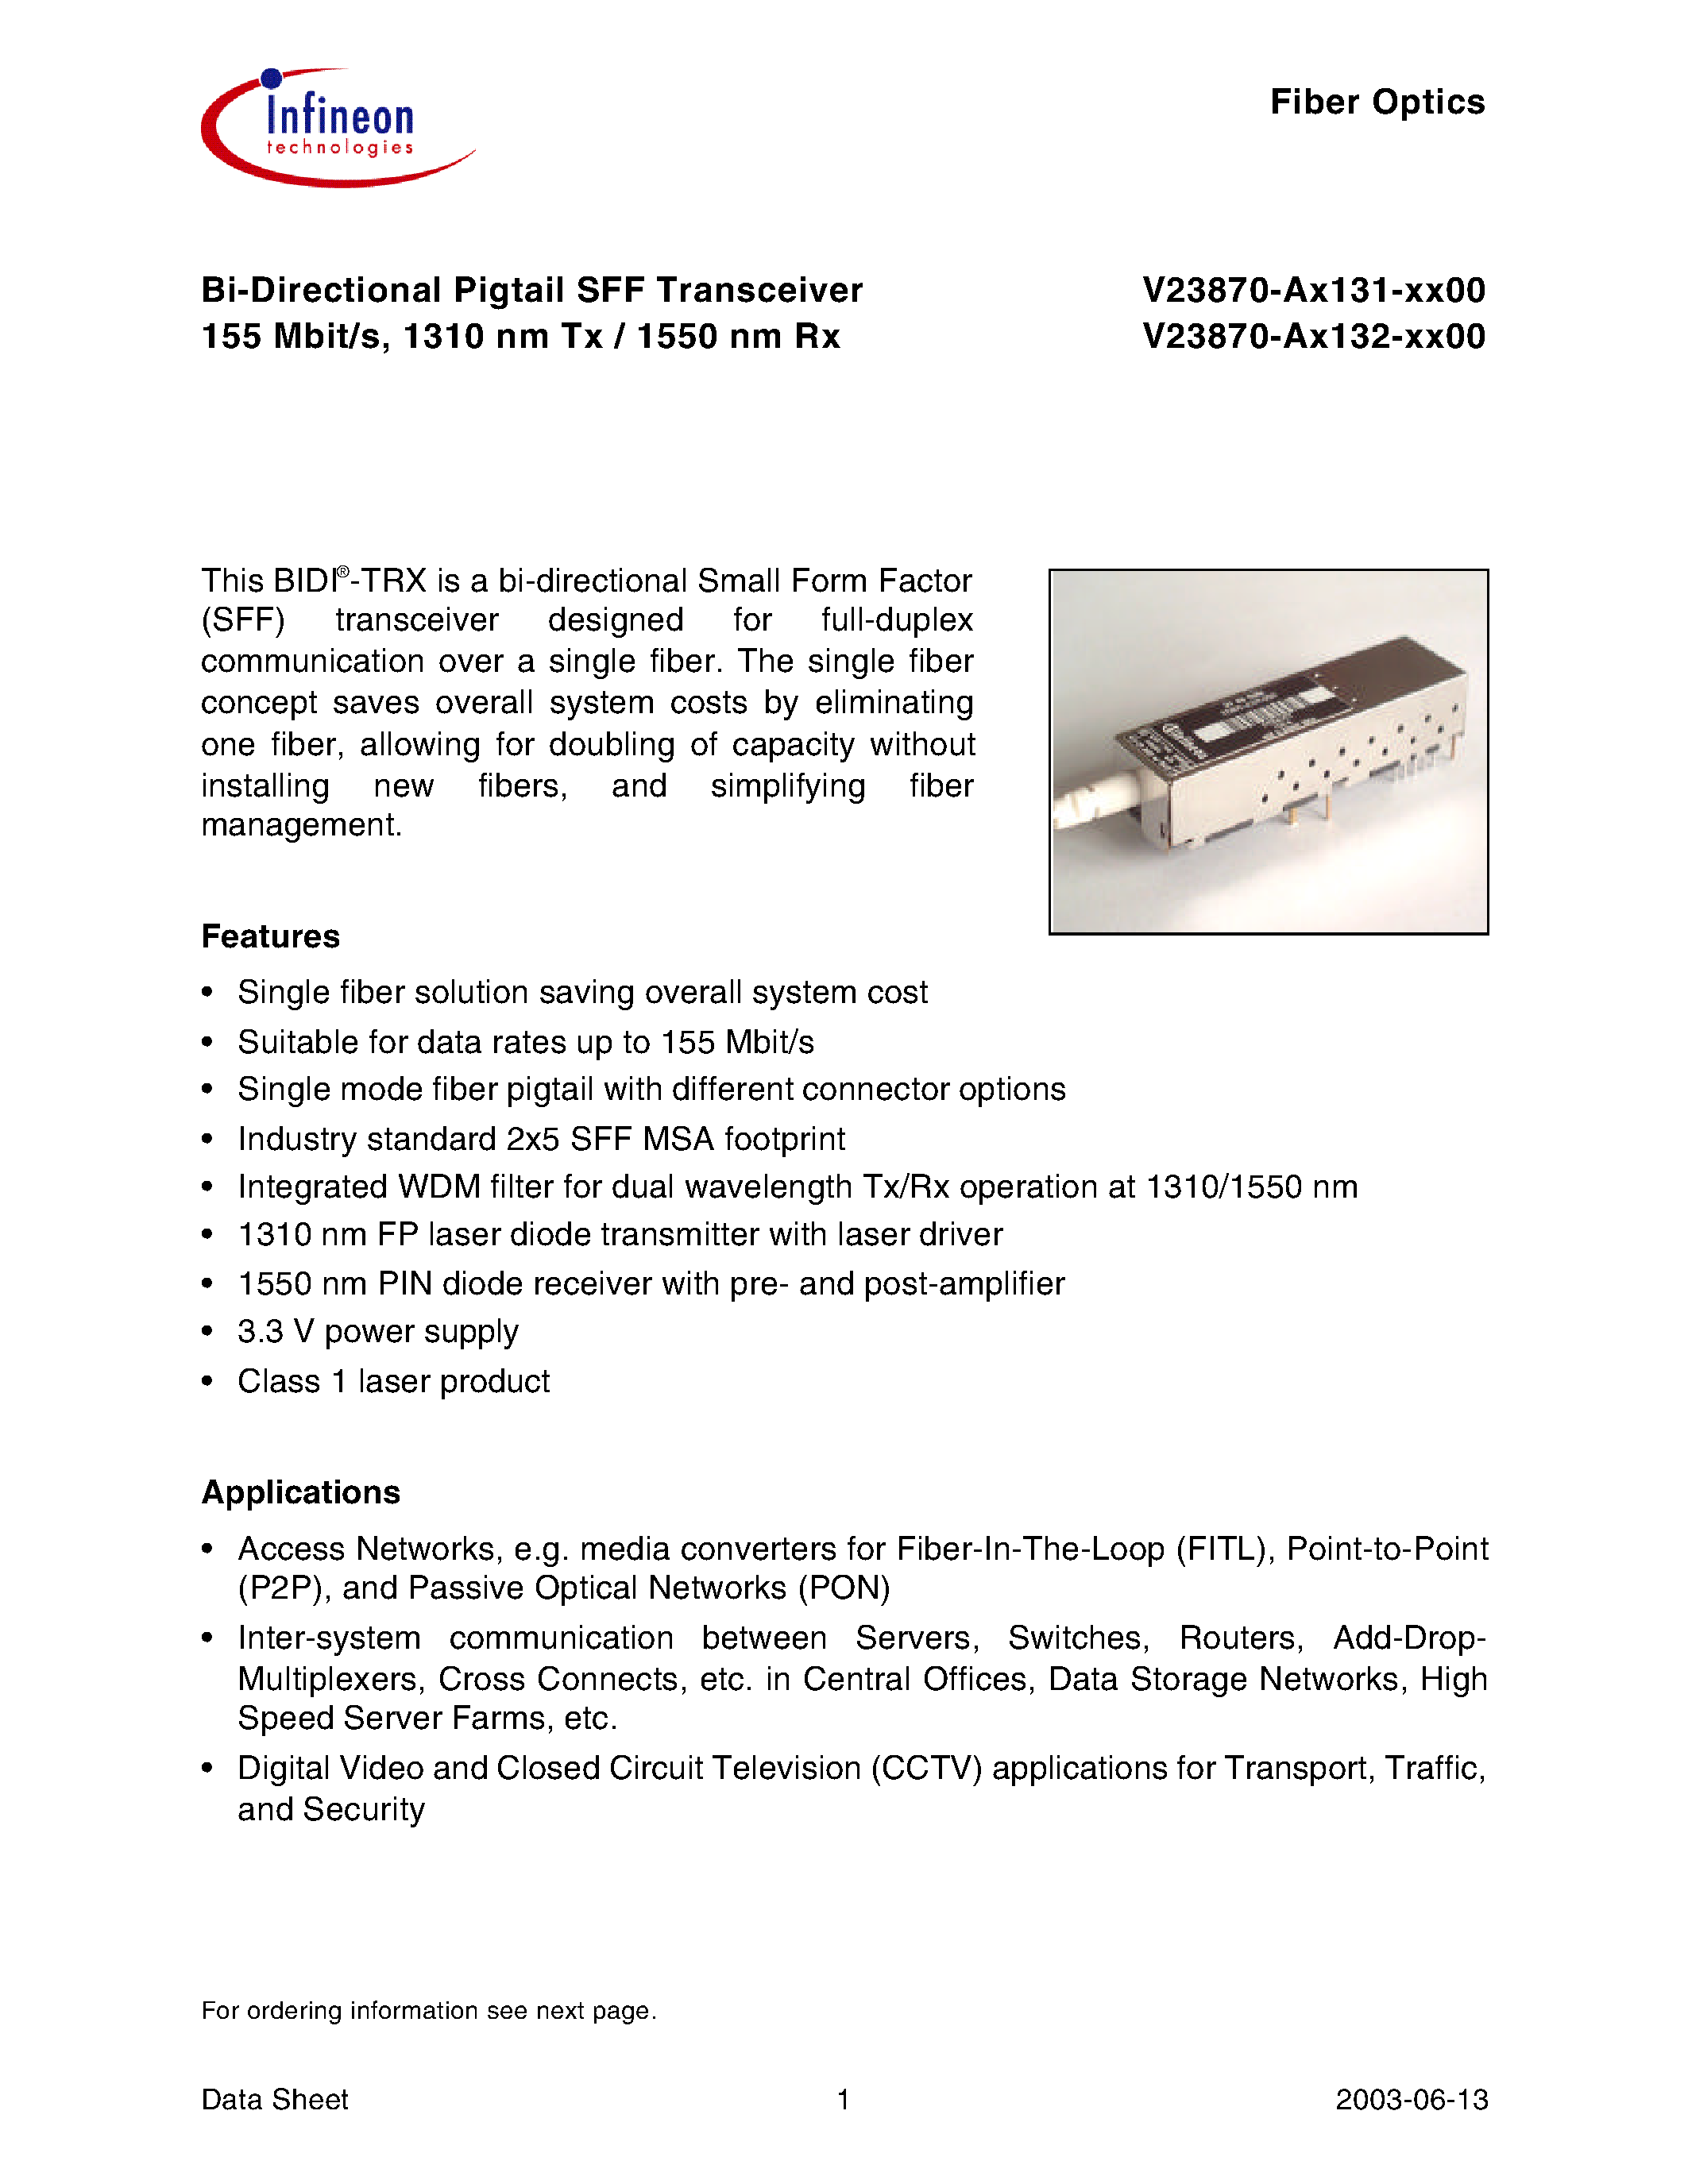 Datasheet V23870-A1132-F100 - Bi-Directional Pigtail SFF Transceiver 155 Mbit/s/ 1310 nm Tx / 1550 nm Rx page 1